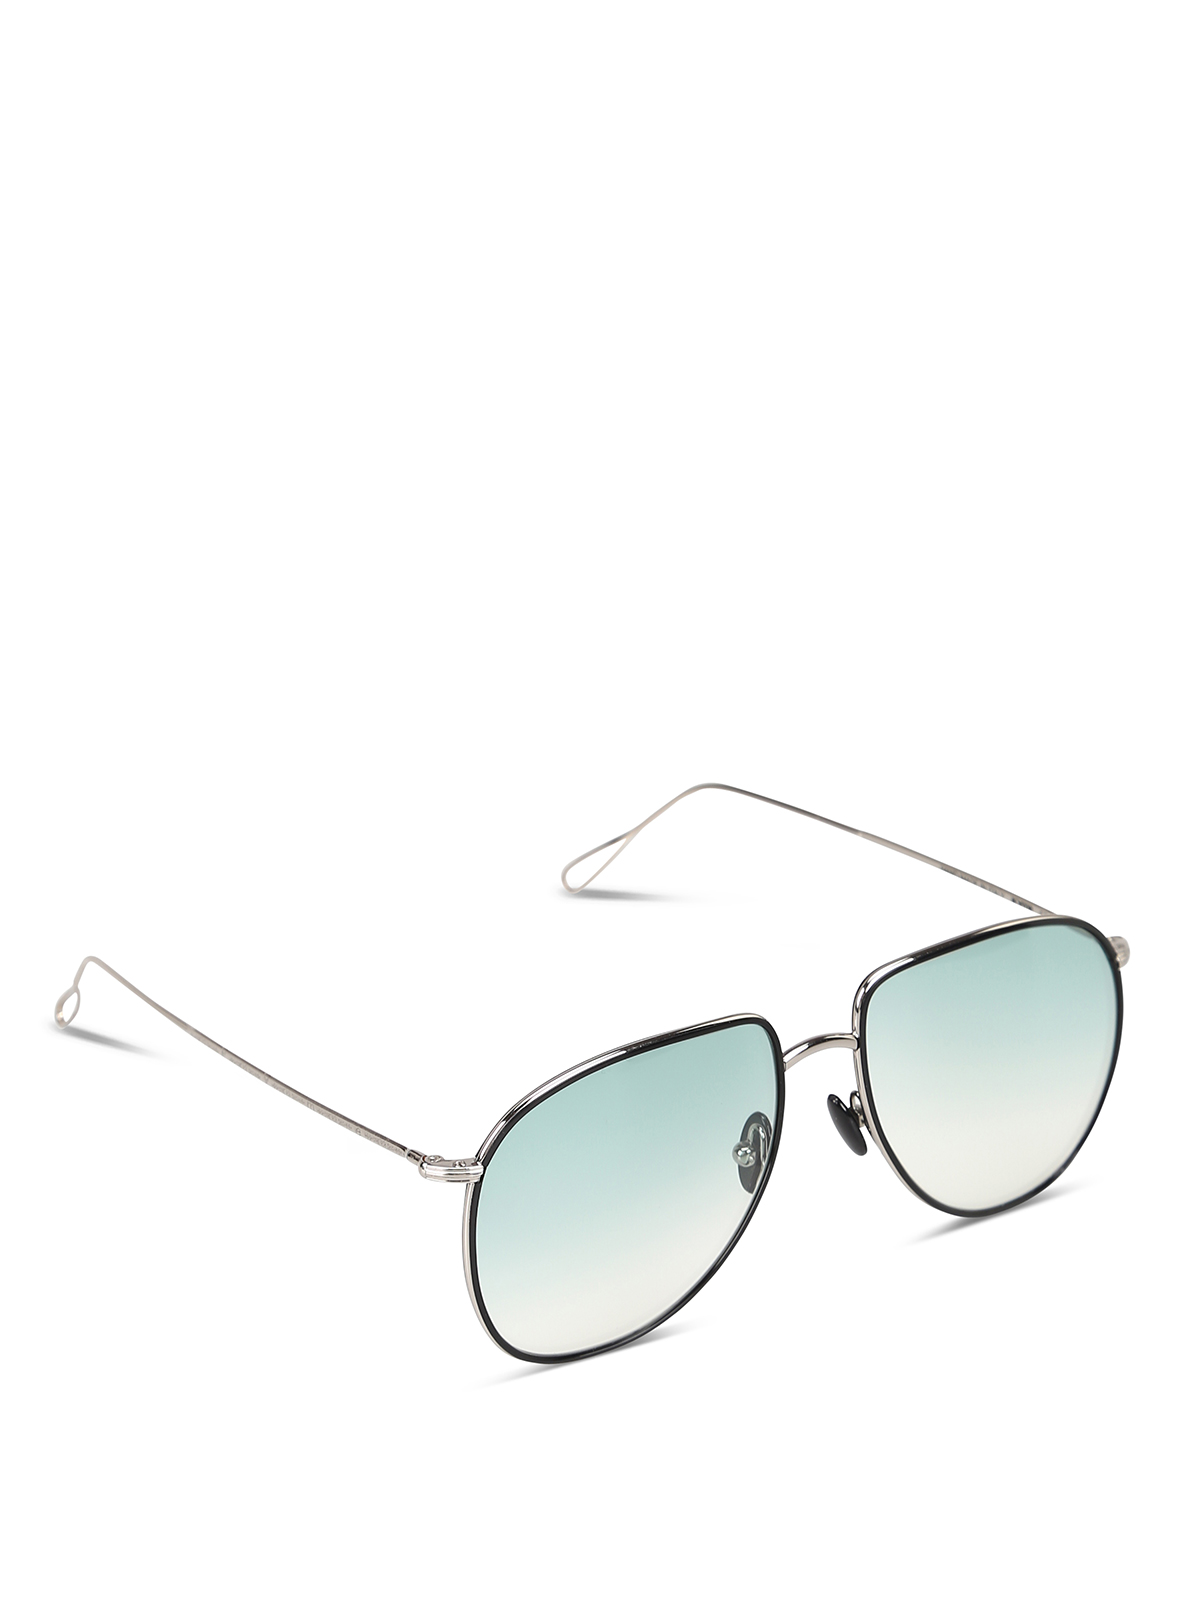 KYME BEVERLY SUNGLASSES